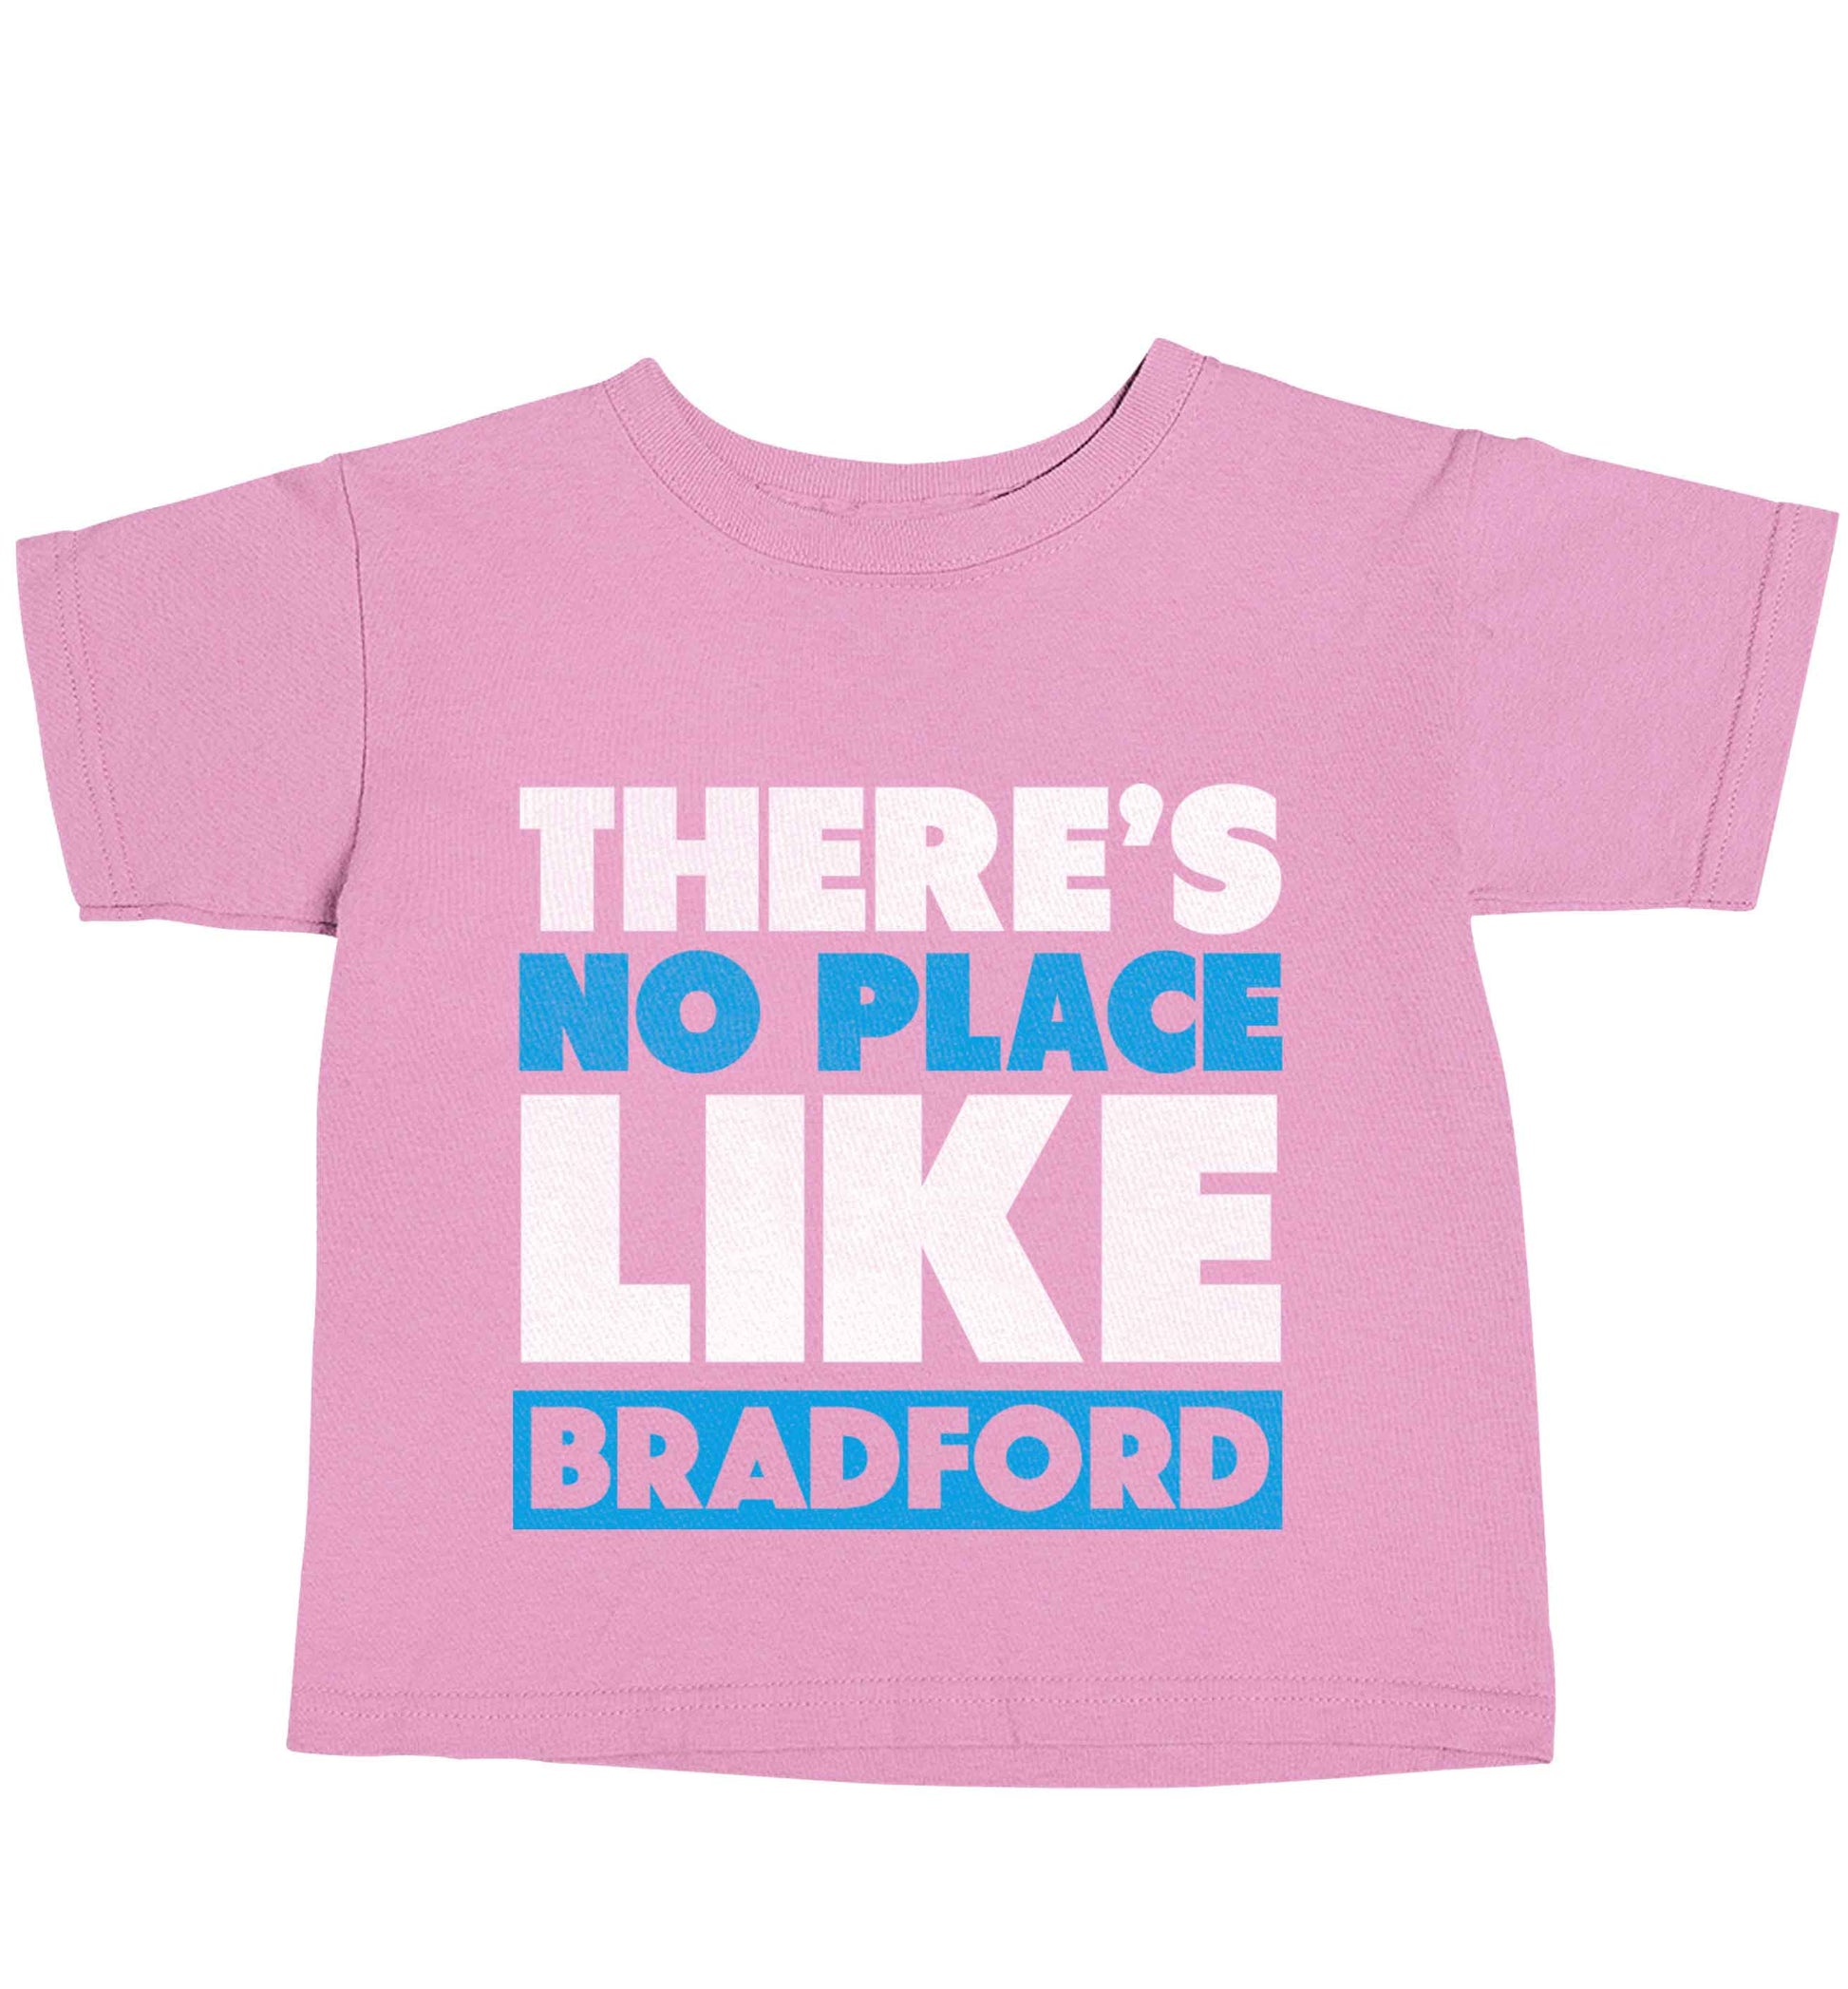 There's no place like Bradford light pink baby toddler Tshirt 2 Years